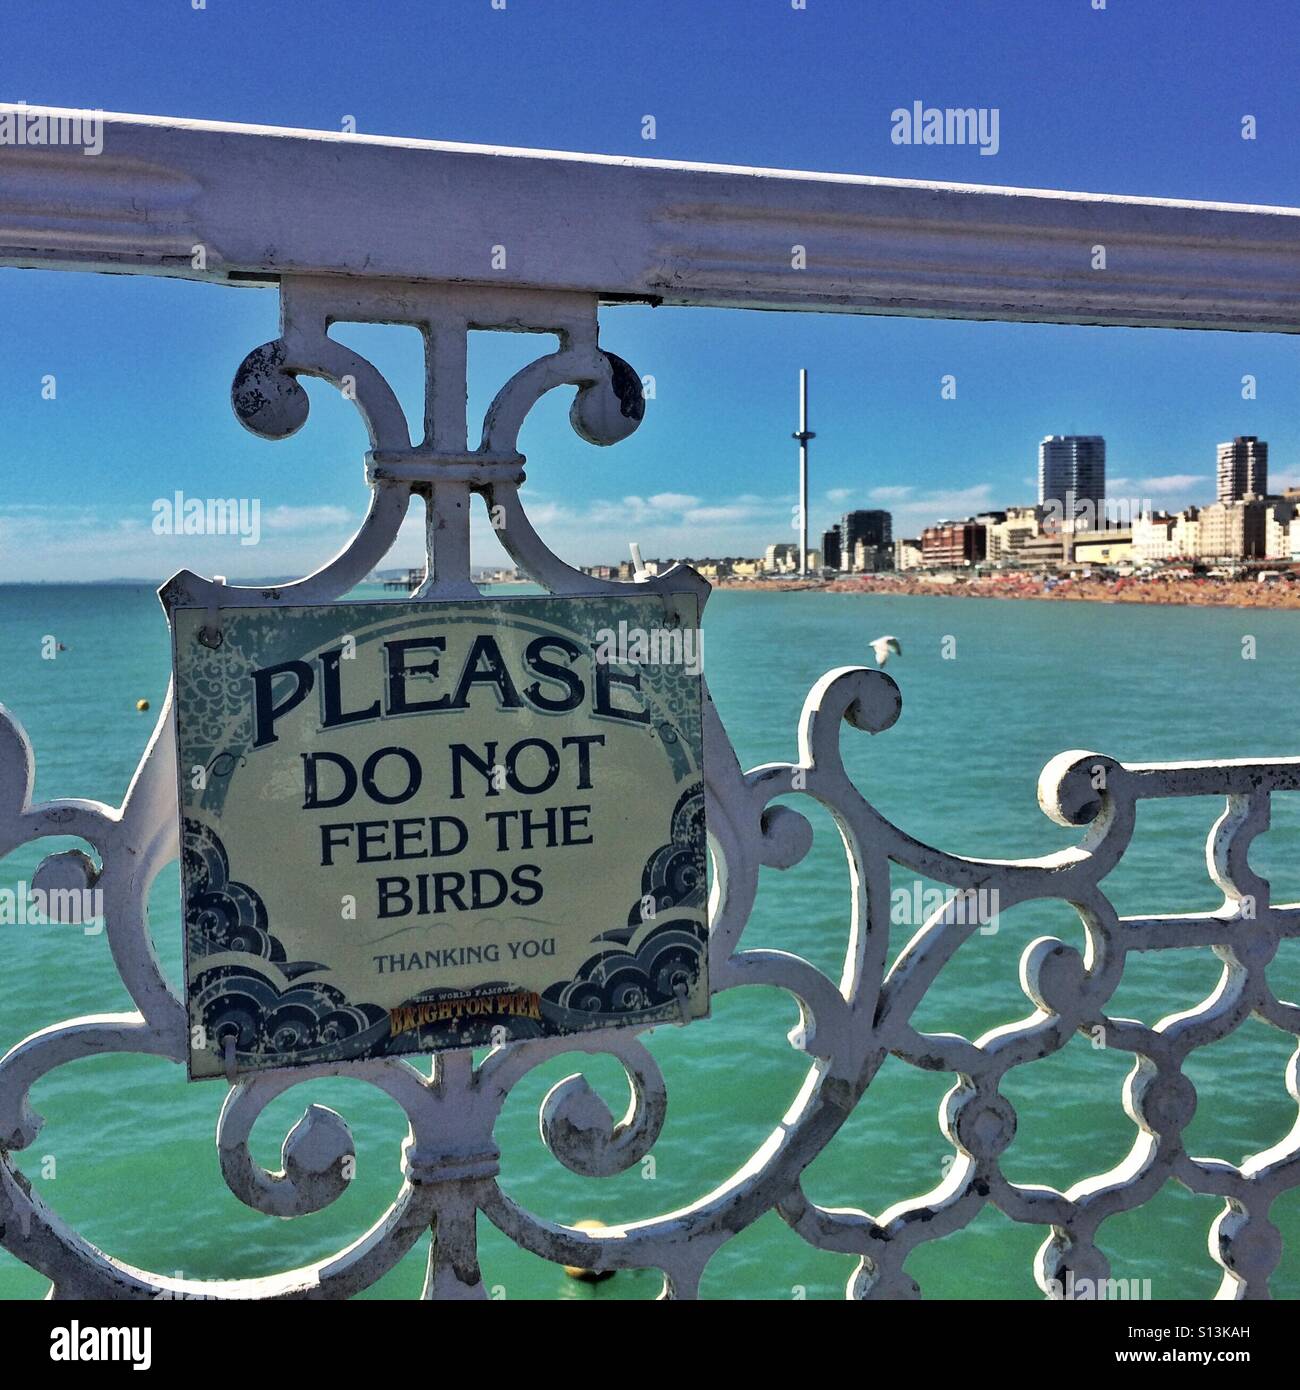 Please Do Not Feed The Birds - Brighton Pier and seafront looking towards the i360 viewing tower. England UK Stock Photo